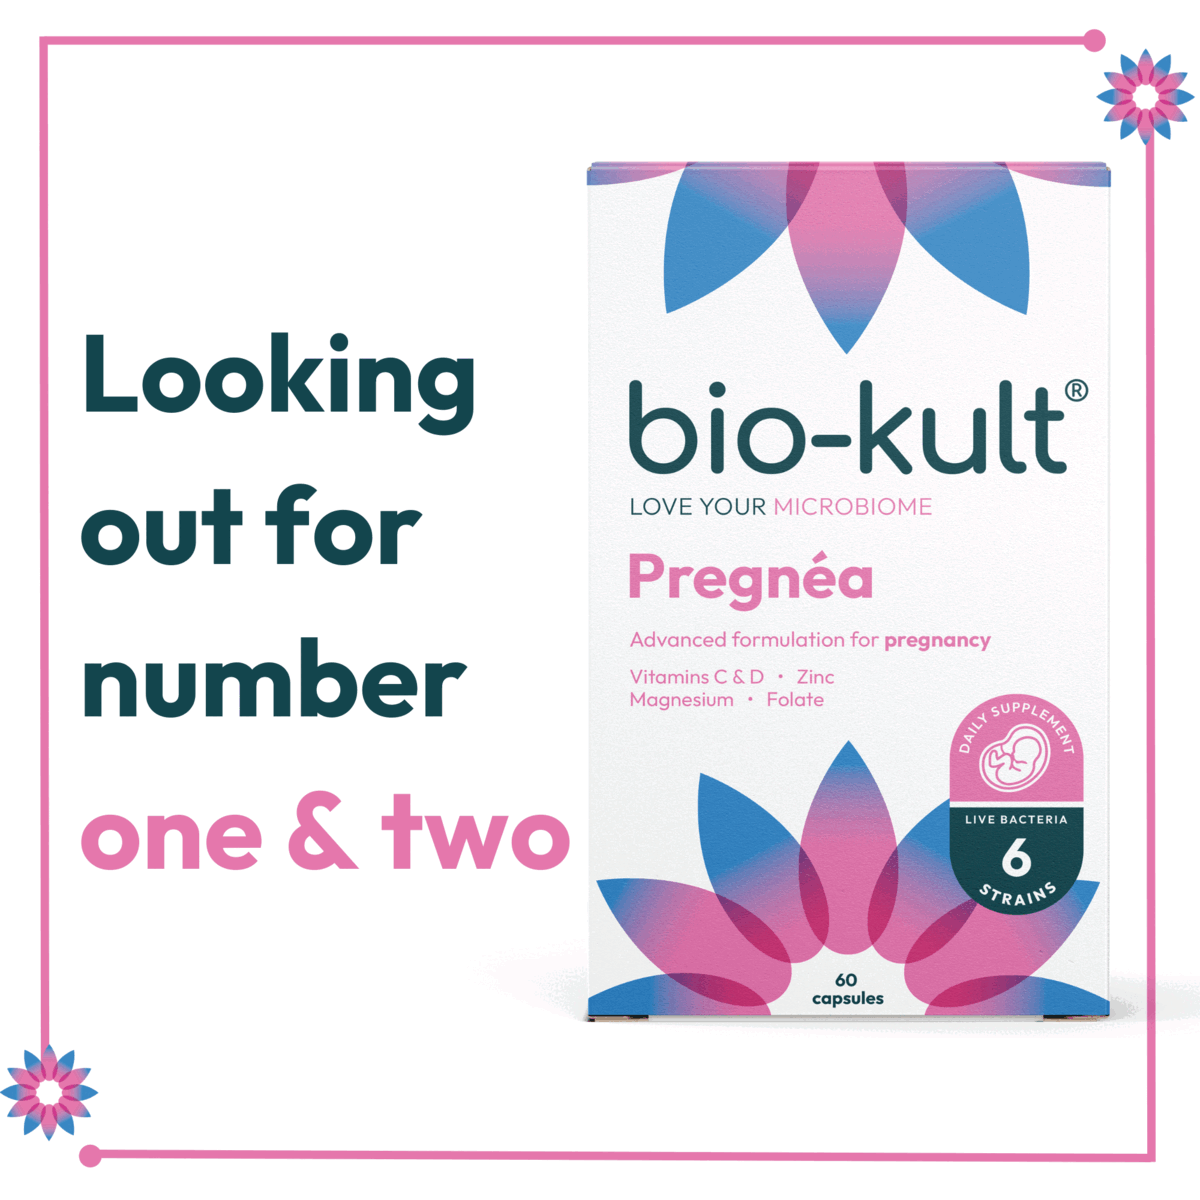 Looking out for number one and two, the little flower with a whole lot of power, new look some award winning bacteria inside!higly recommended - life saver, fantastic - i just can't believe it, great product, we can't hold in our exictment!